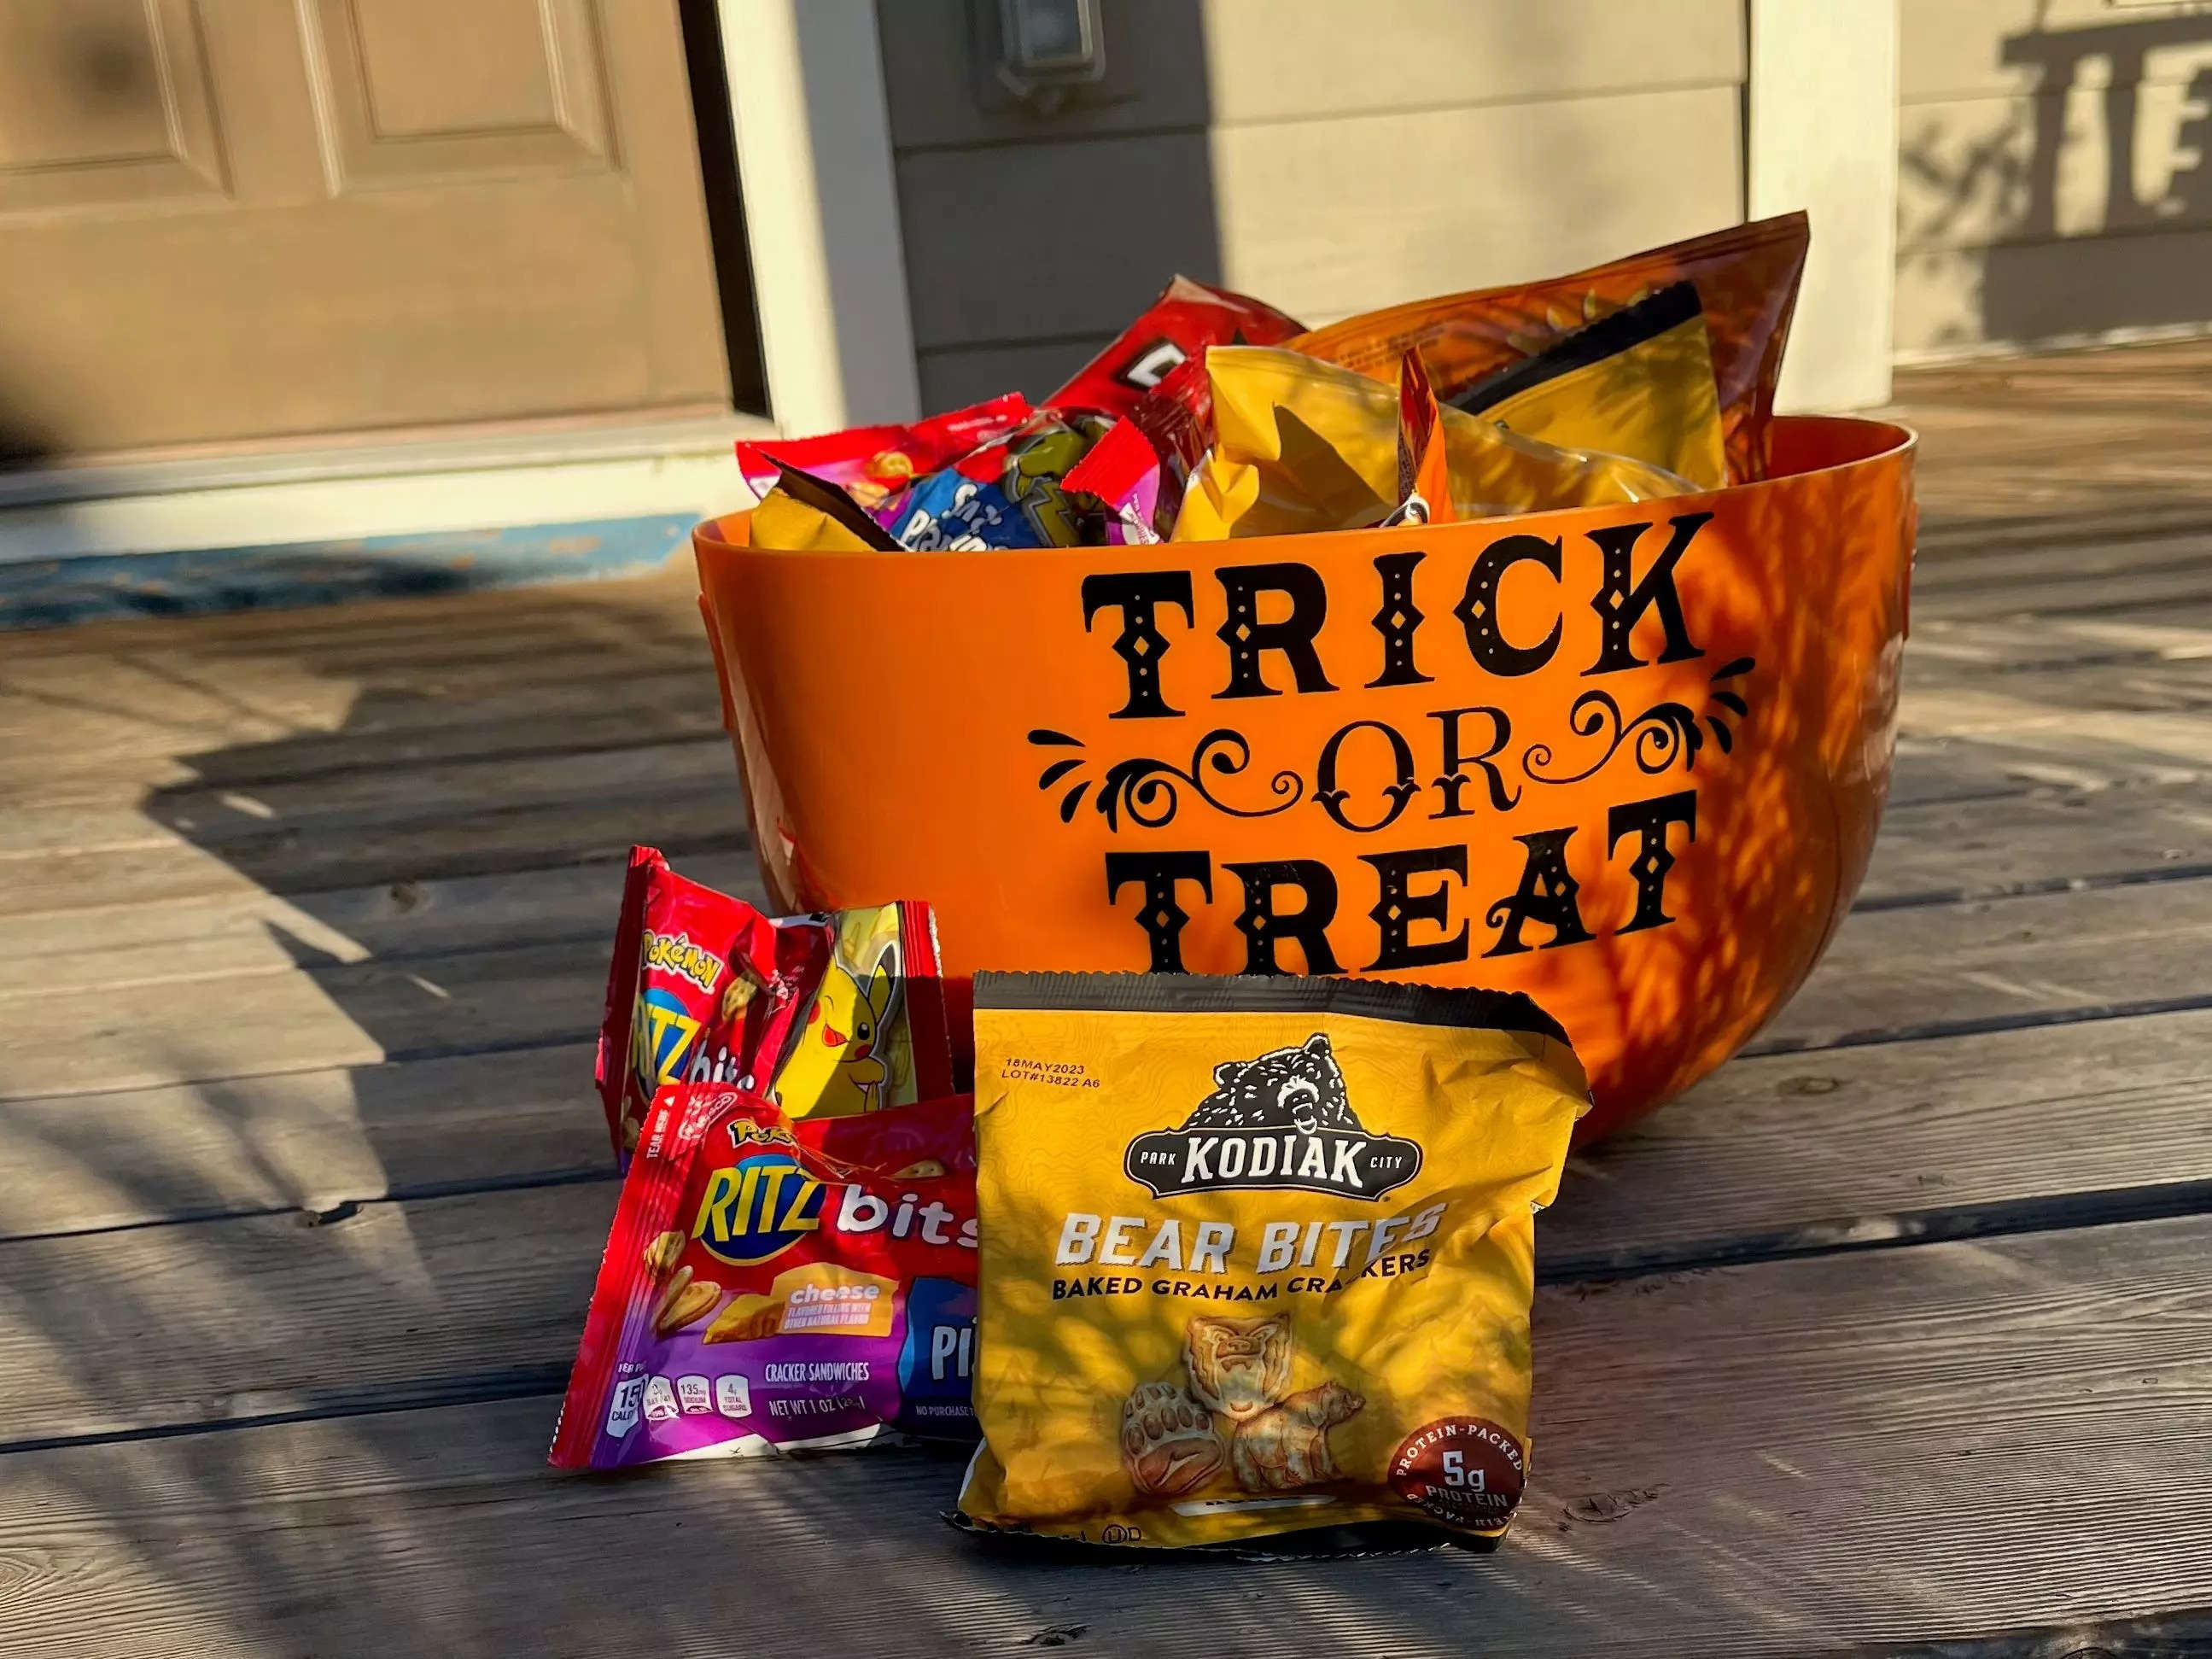 bags of chips on a trick or treat candy bowl